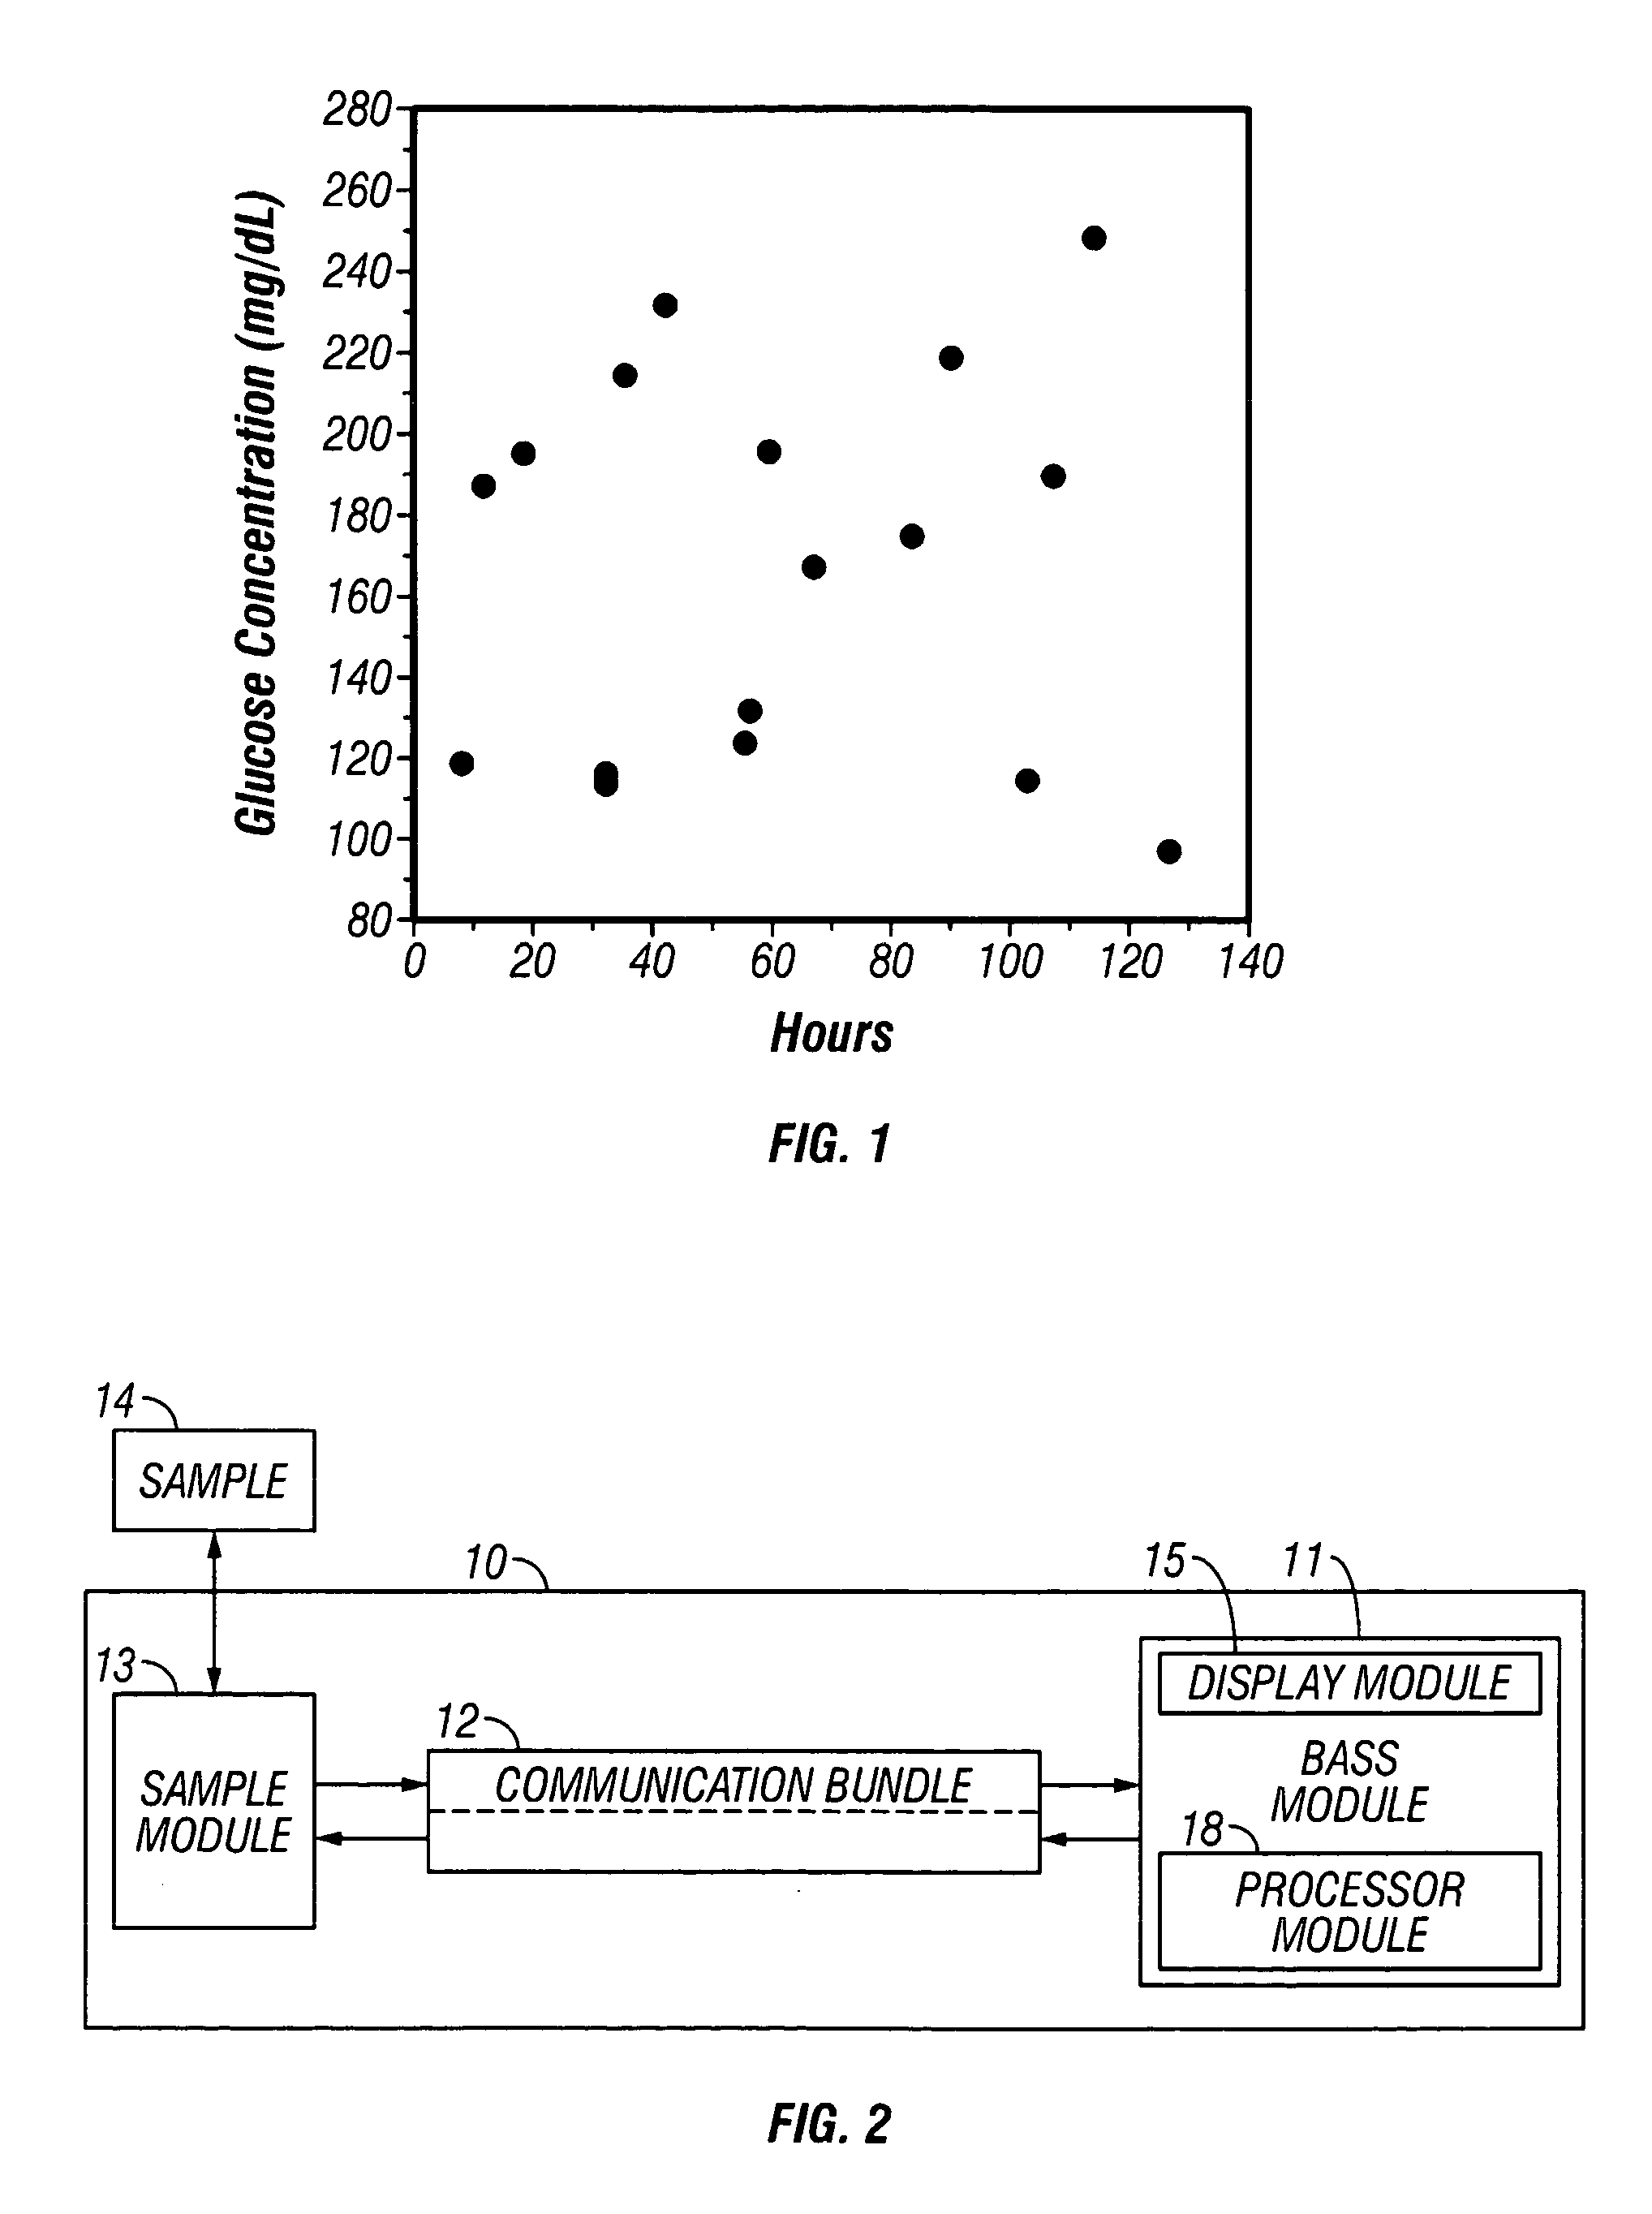 Method and apparatus for presentation of noninvasive glucose concentration information